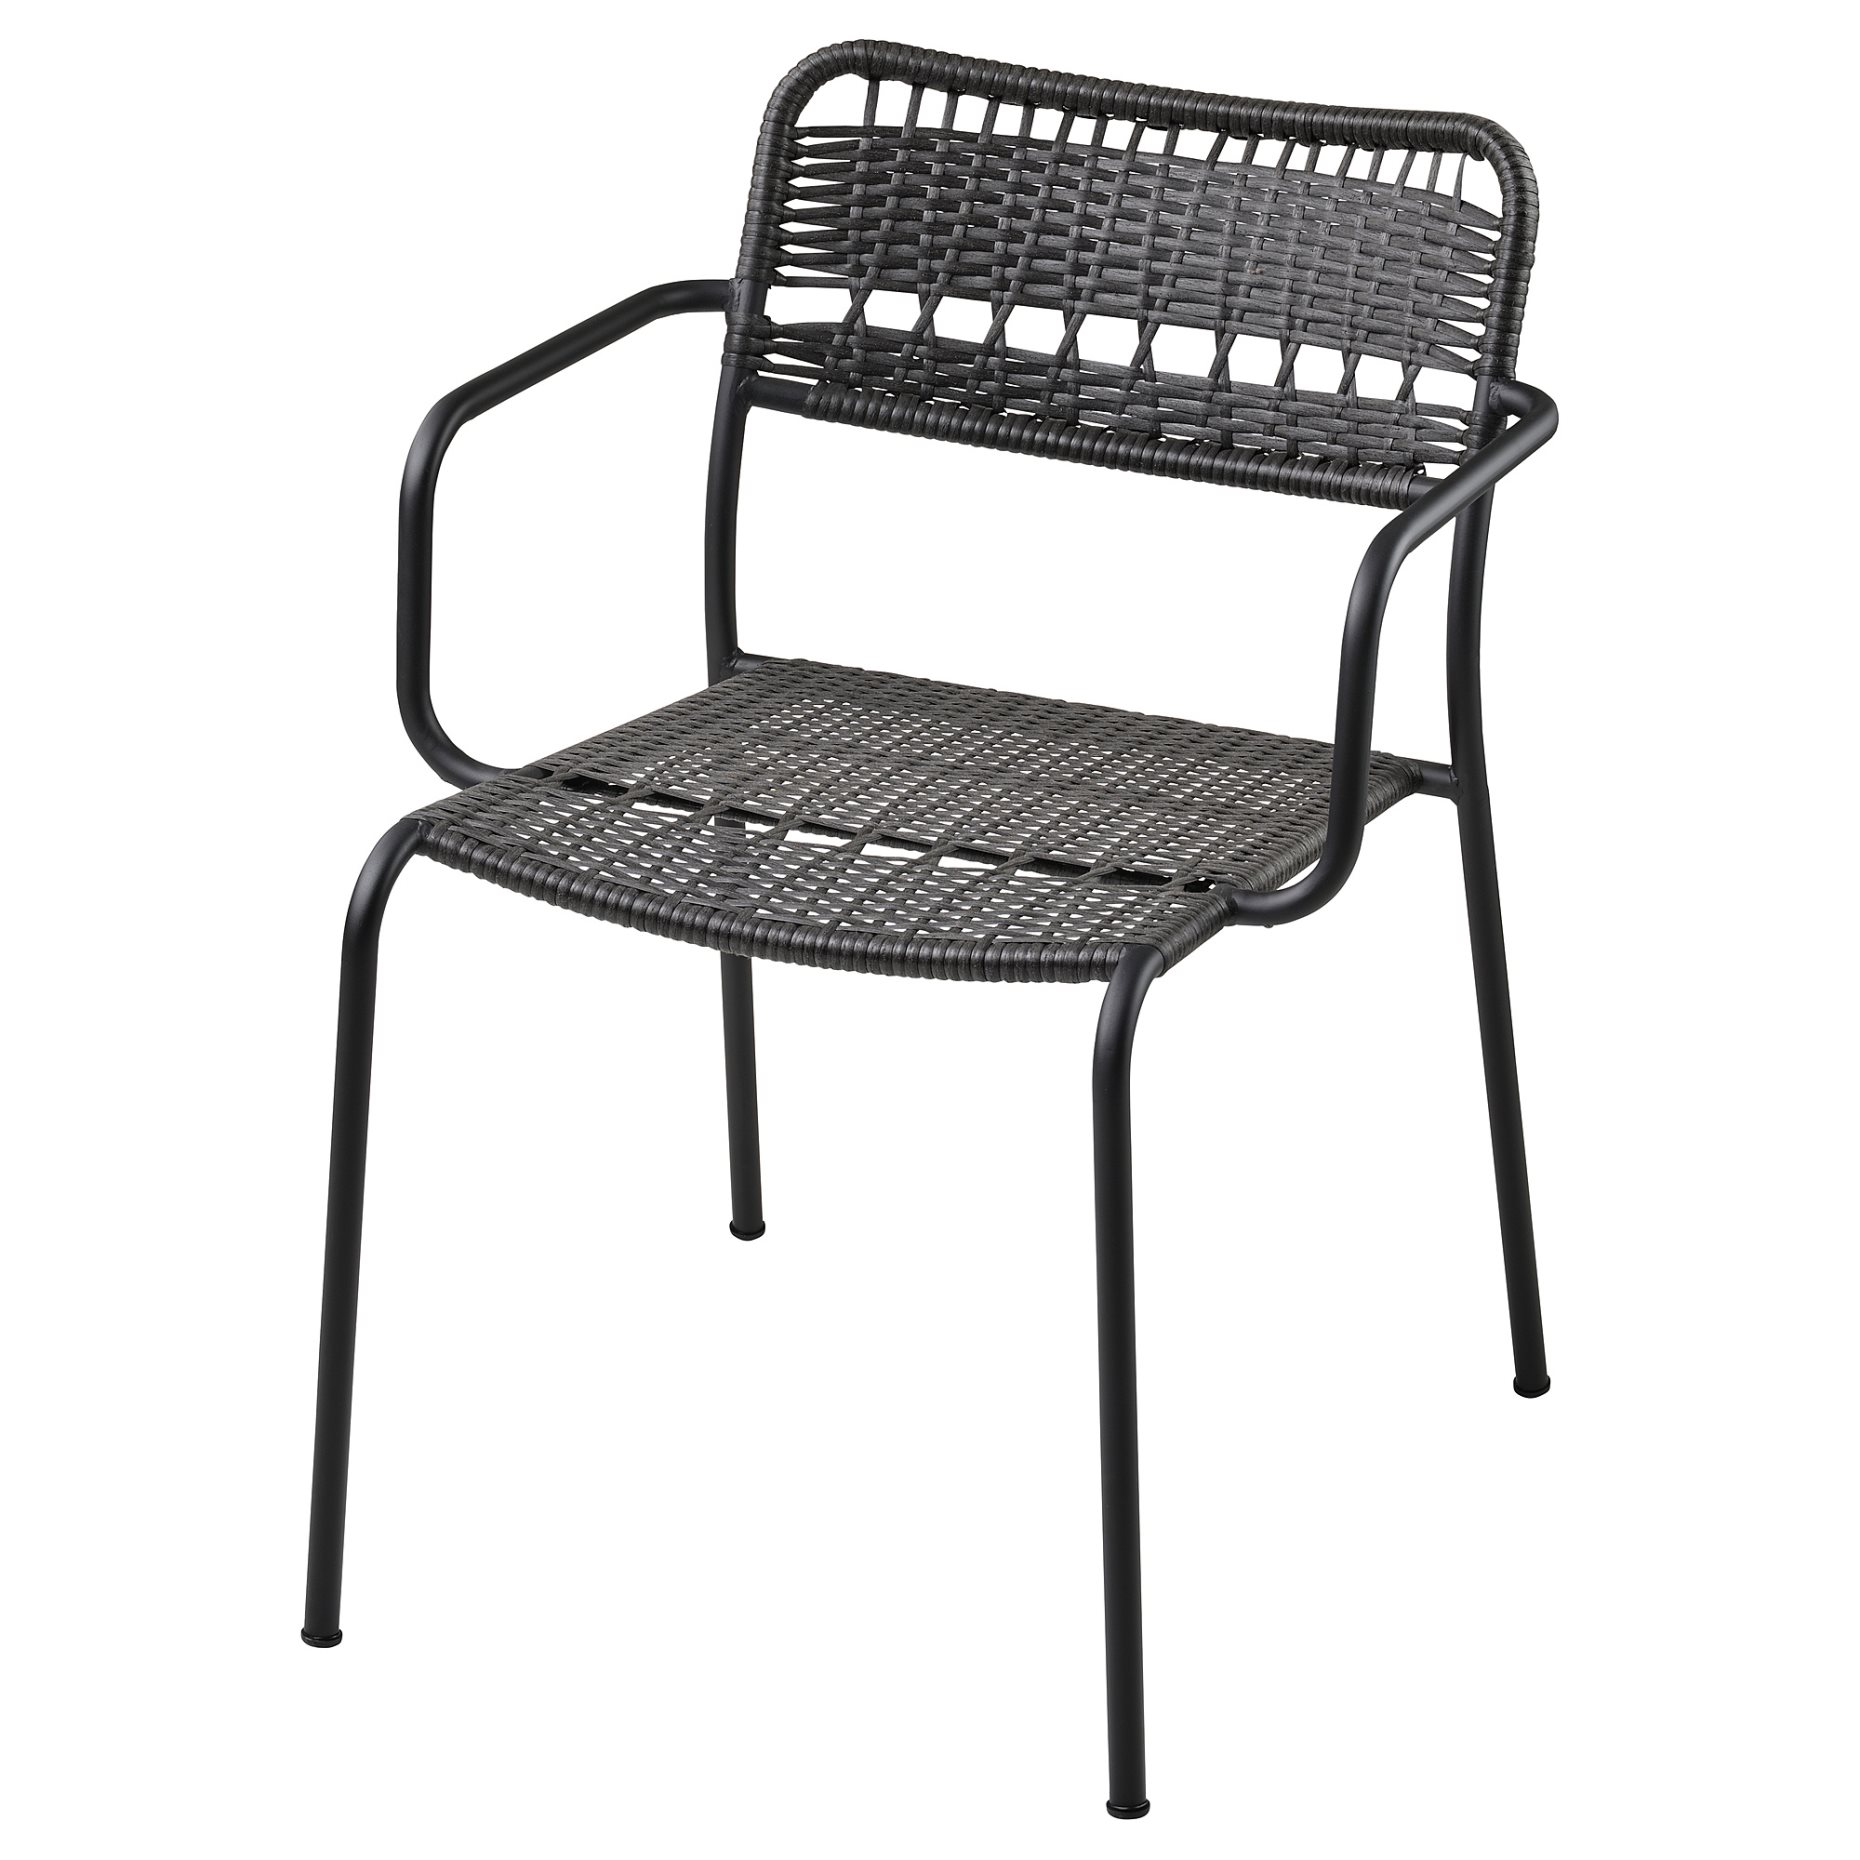 LÄCKÖ, chair with armrests, outdoor, 604.633.04